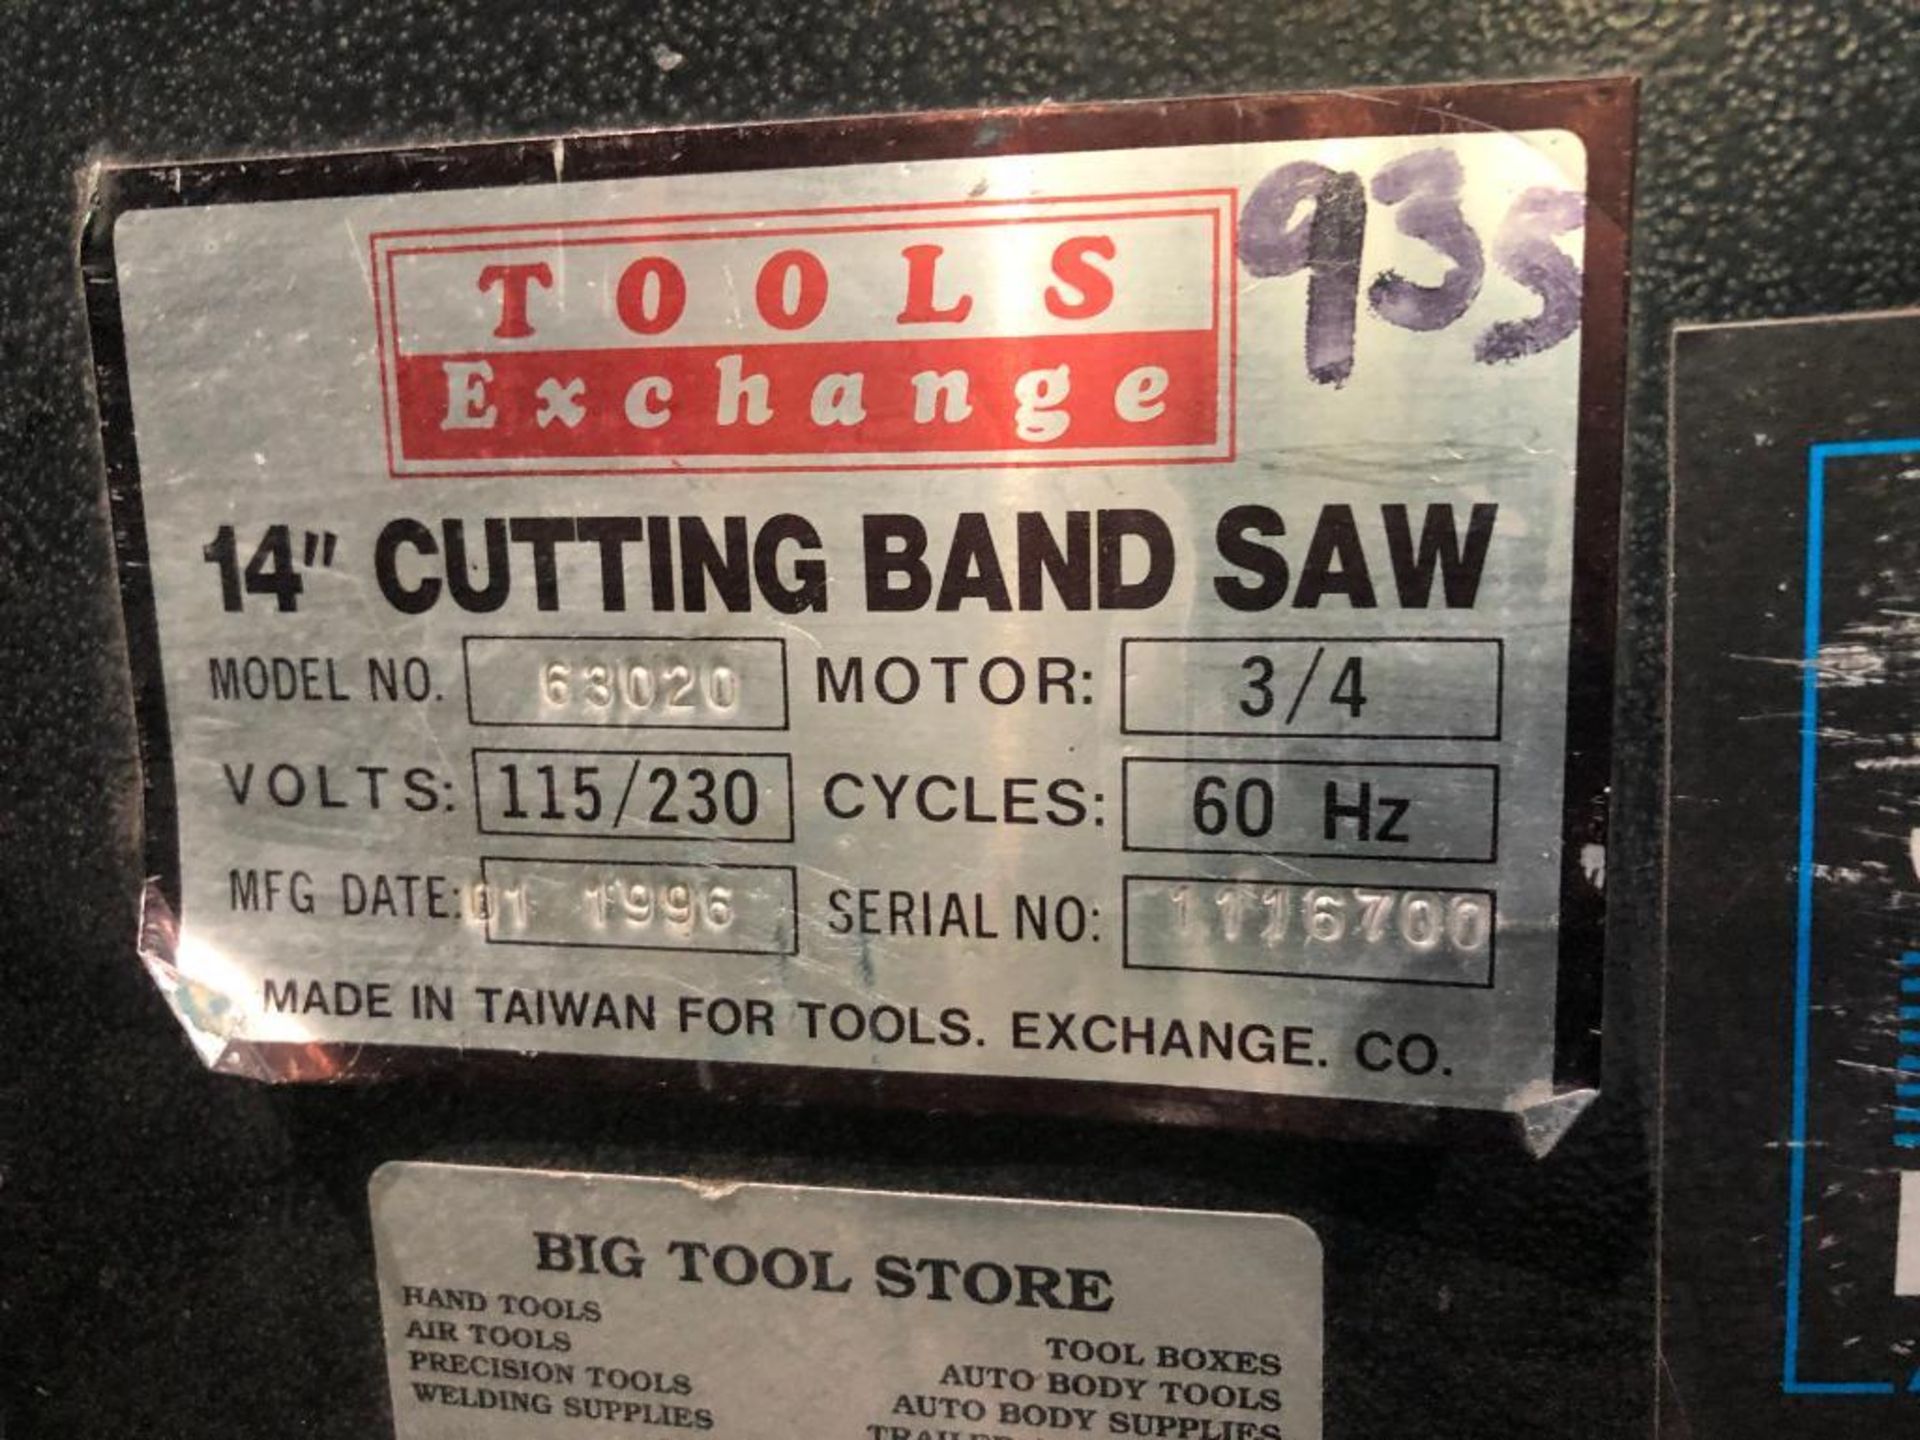 Tool Exchange 14" Cutting Band Saw, Model 63020, Volts 115/230, S/N 1116700 - Image 3 of 3